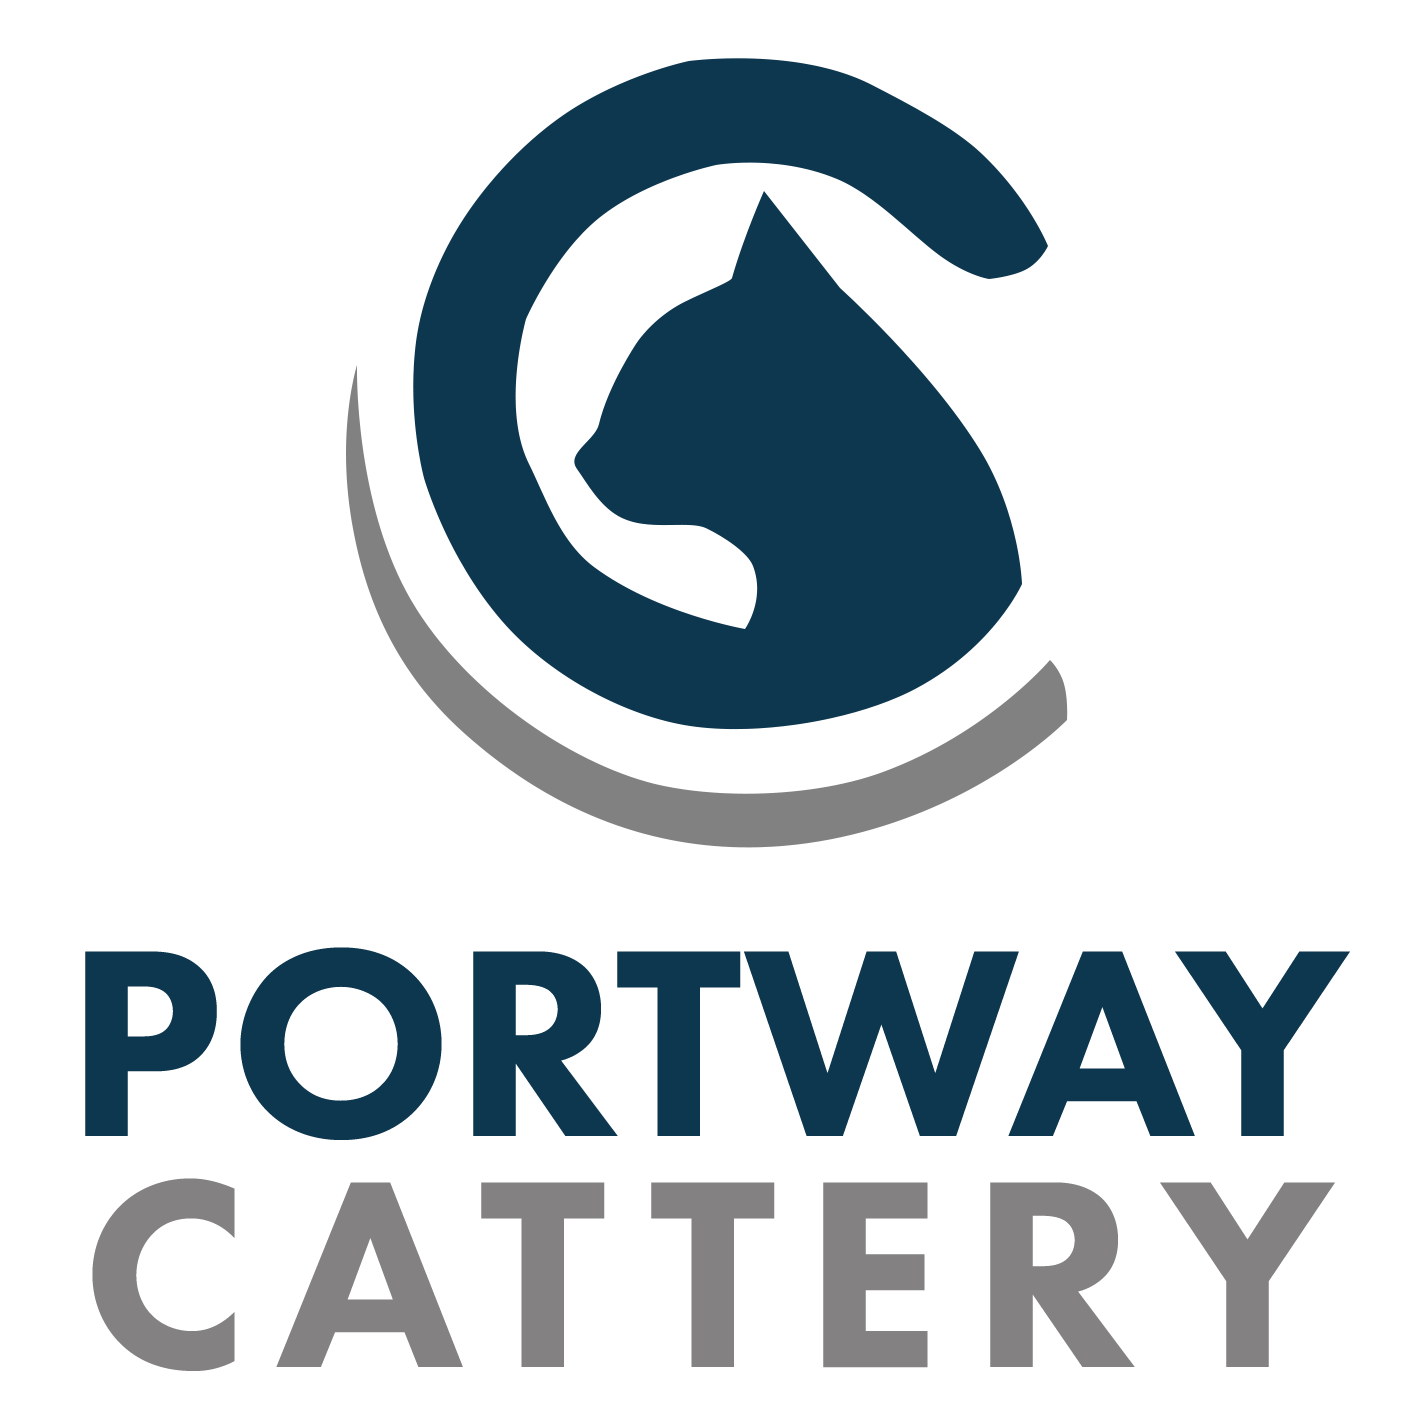 Portway Cattery